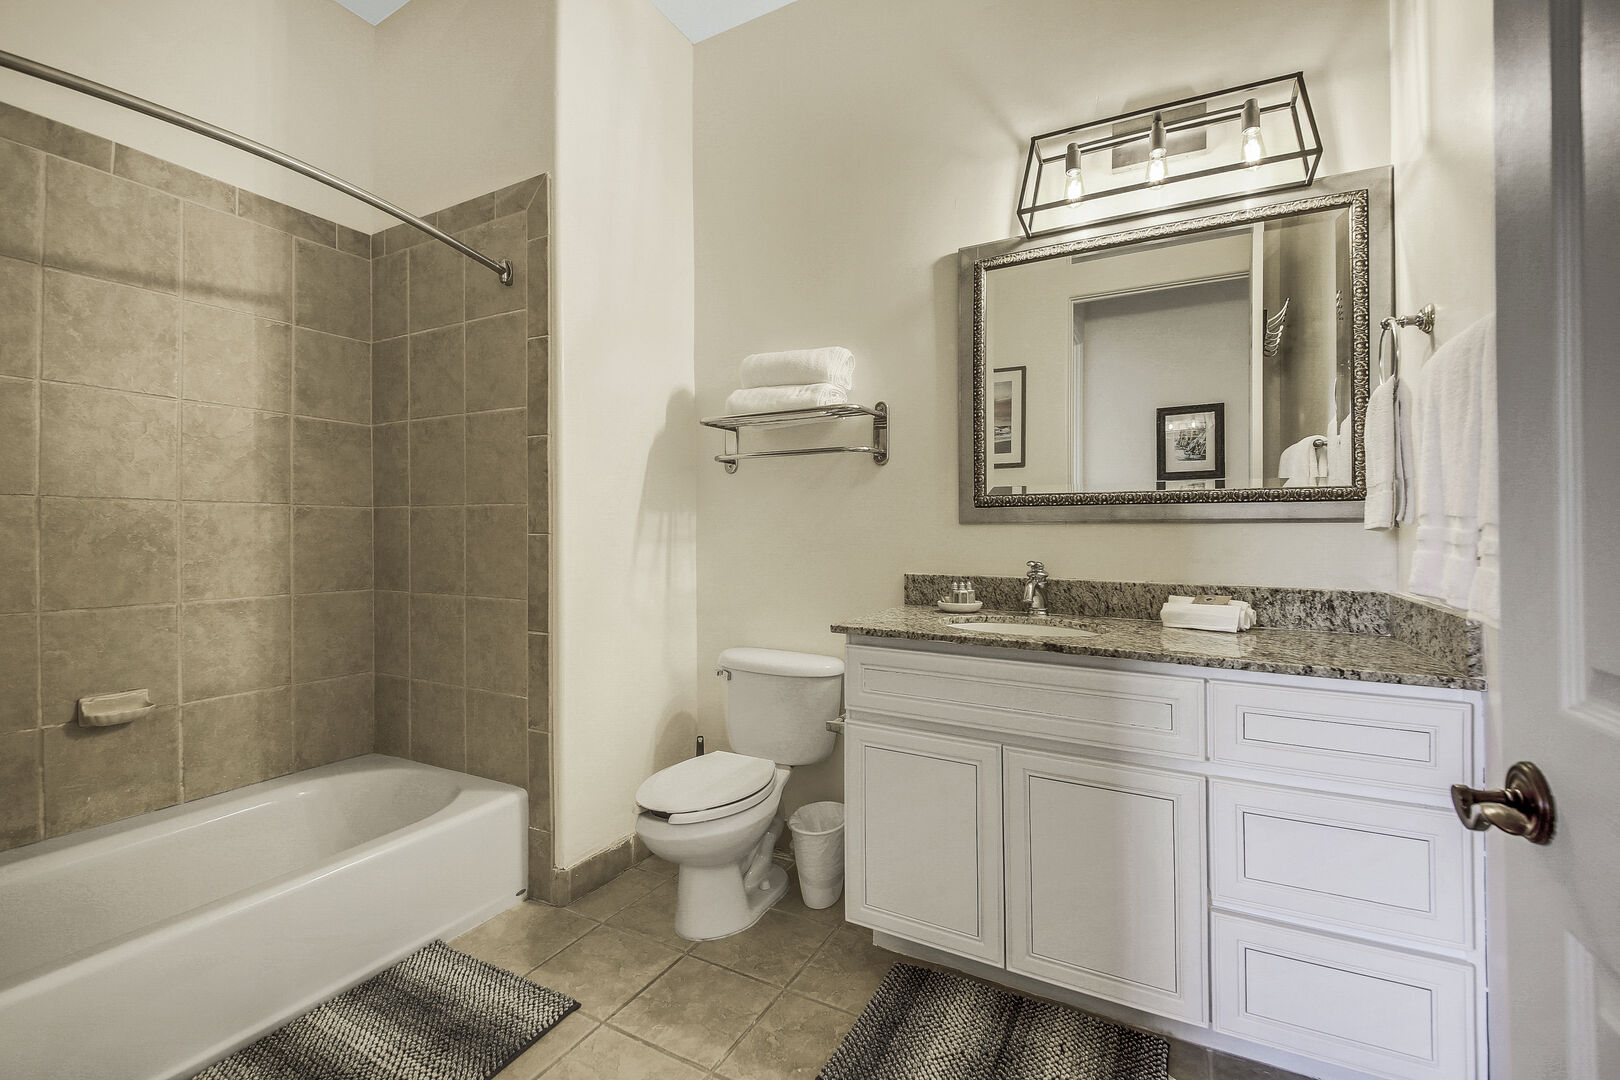 The hallway bathroom is located just outside of the Master Suite and features a shower and tub combo, and a vanity sink.